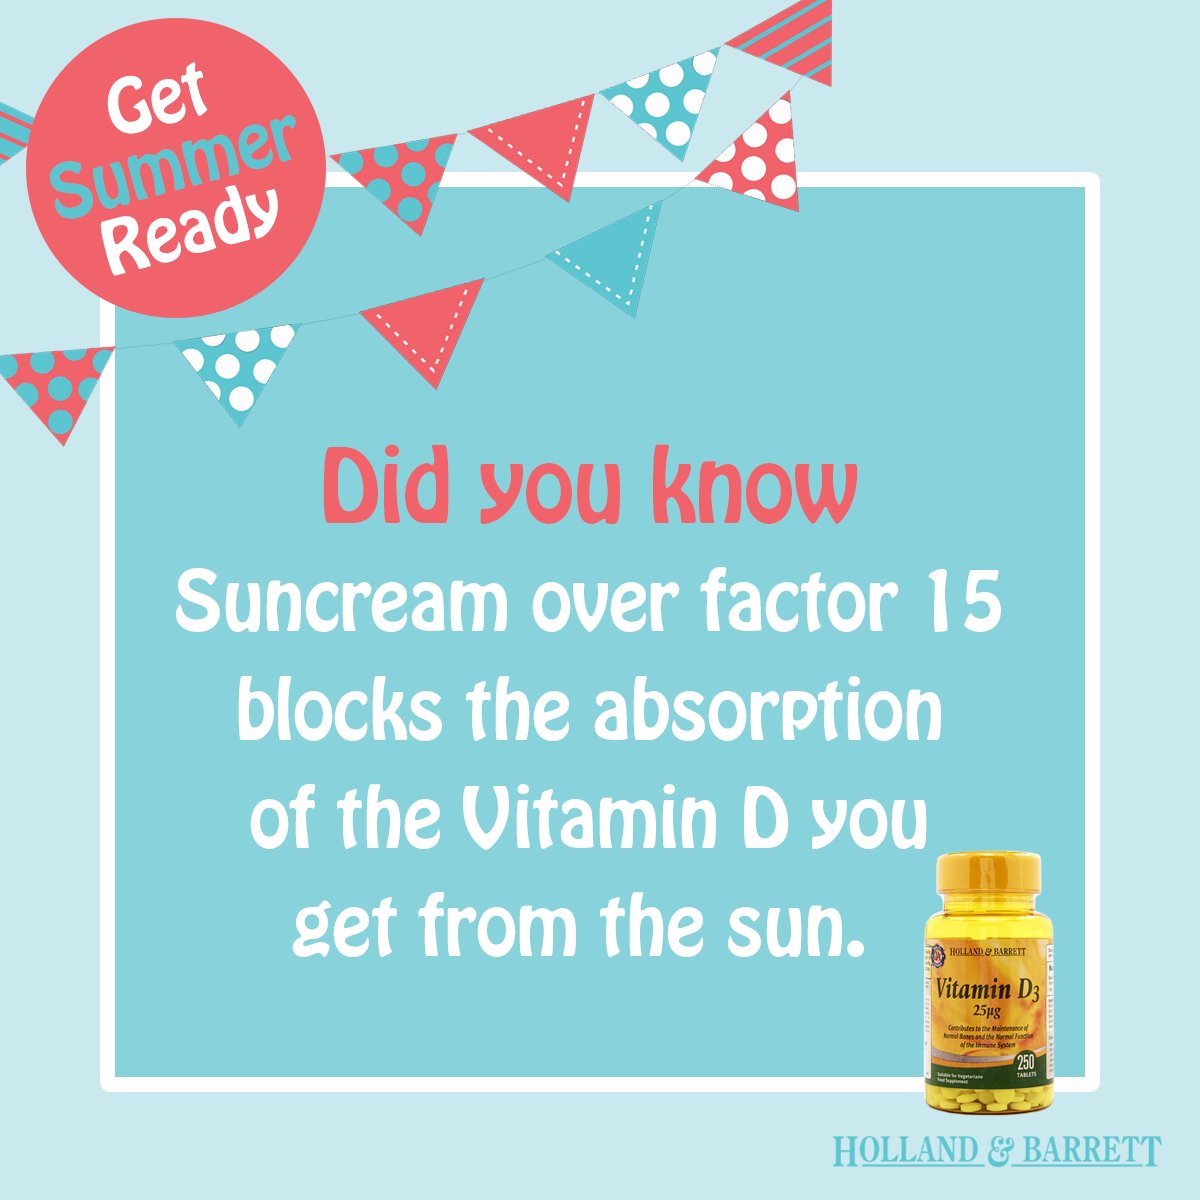 You still need to top up your vitamin D levels, even when the sun is out. Here's why... https://t.co/sywMq4Luu4